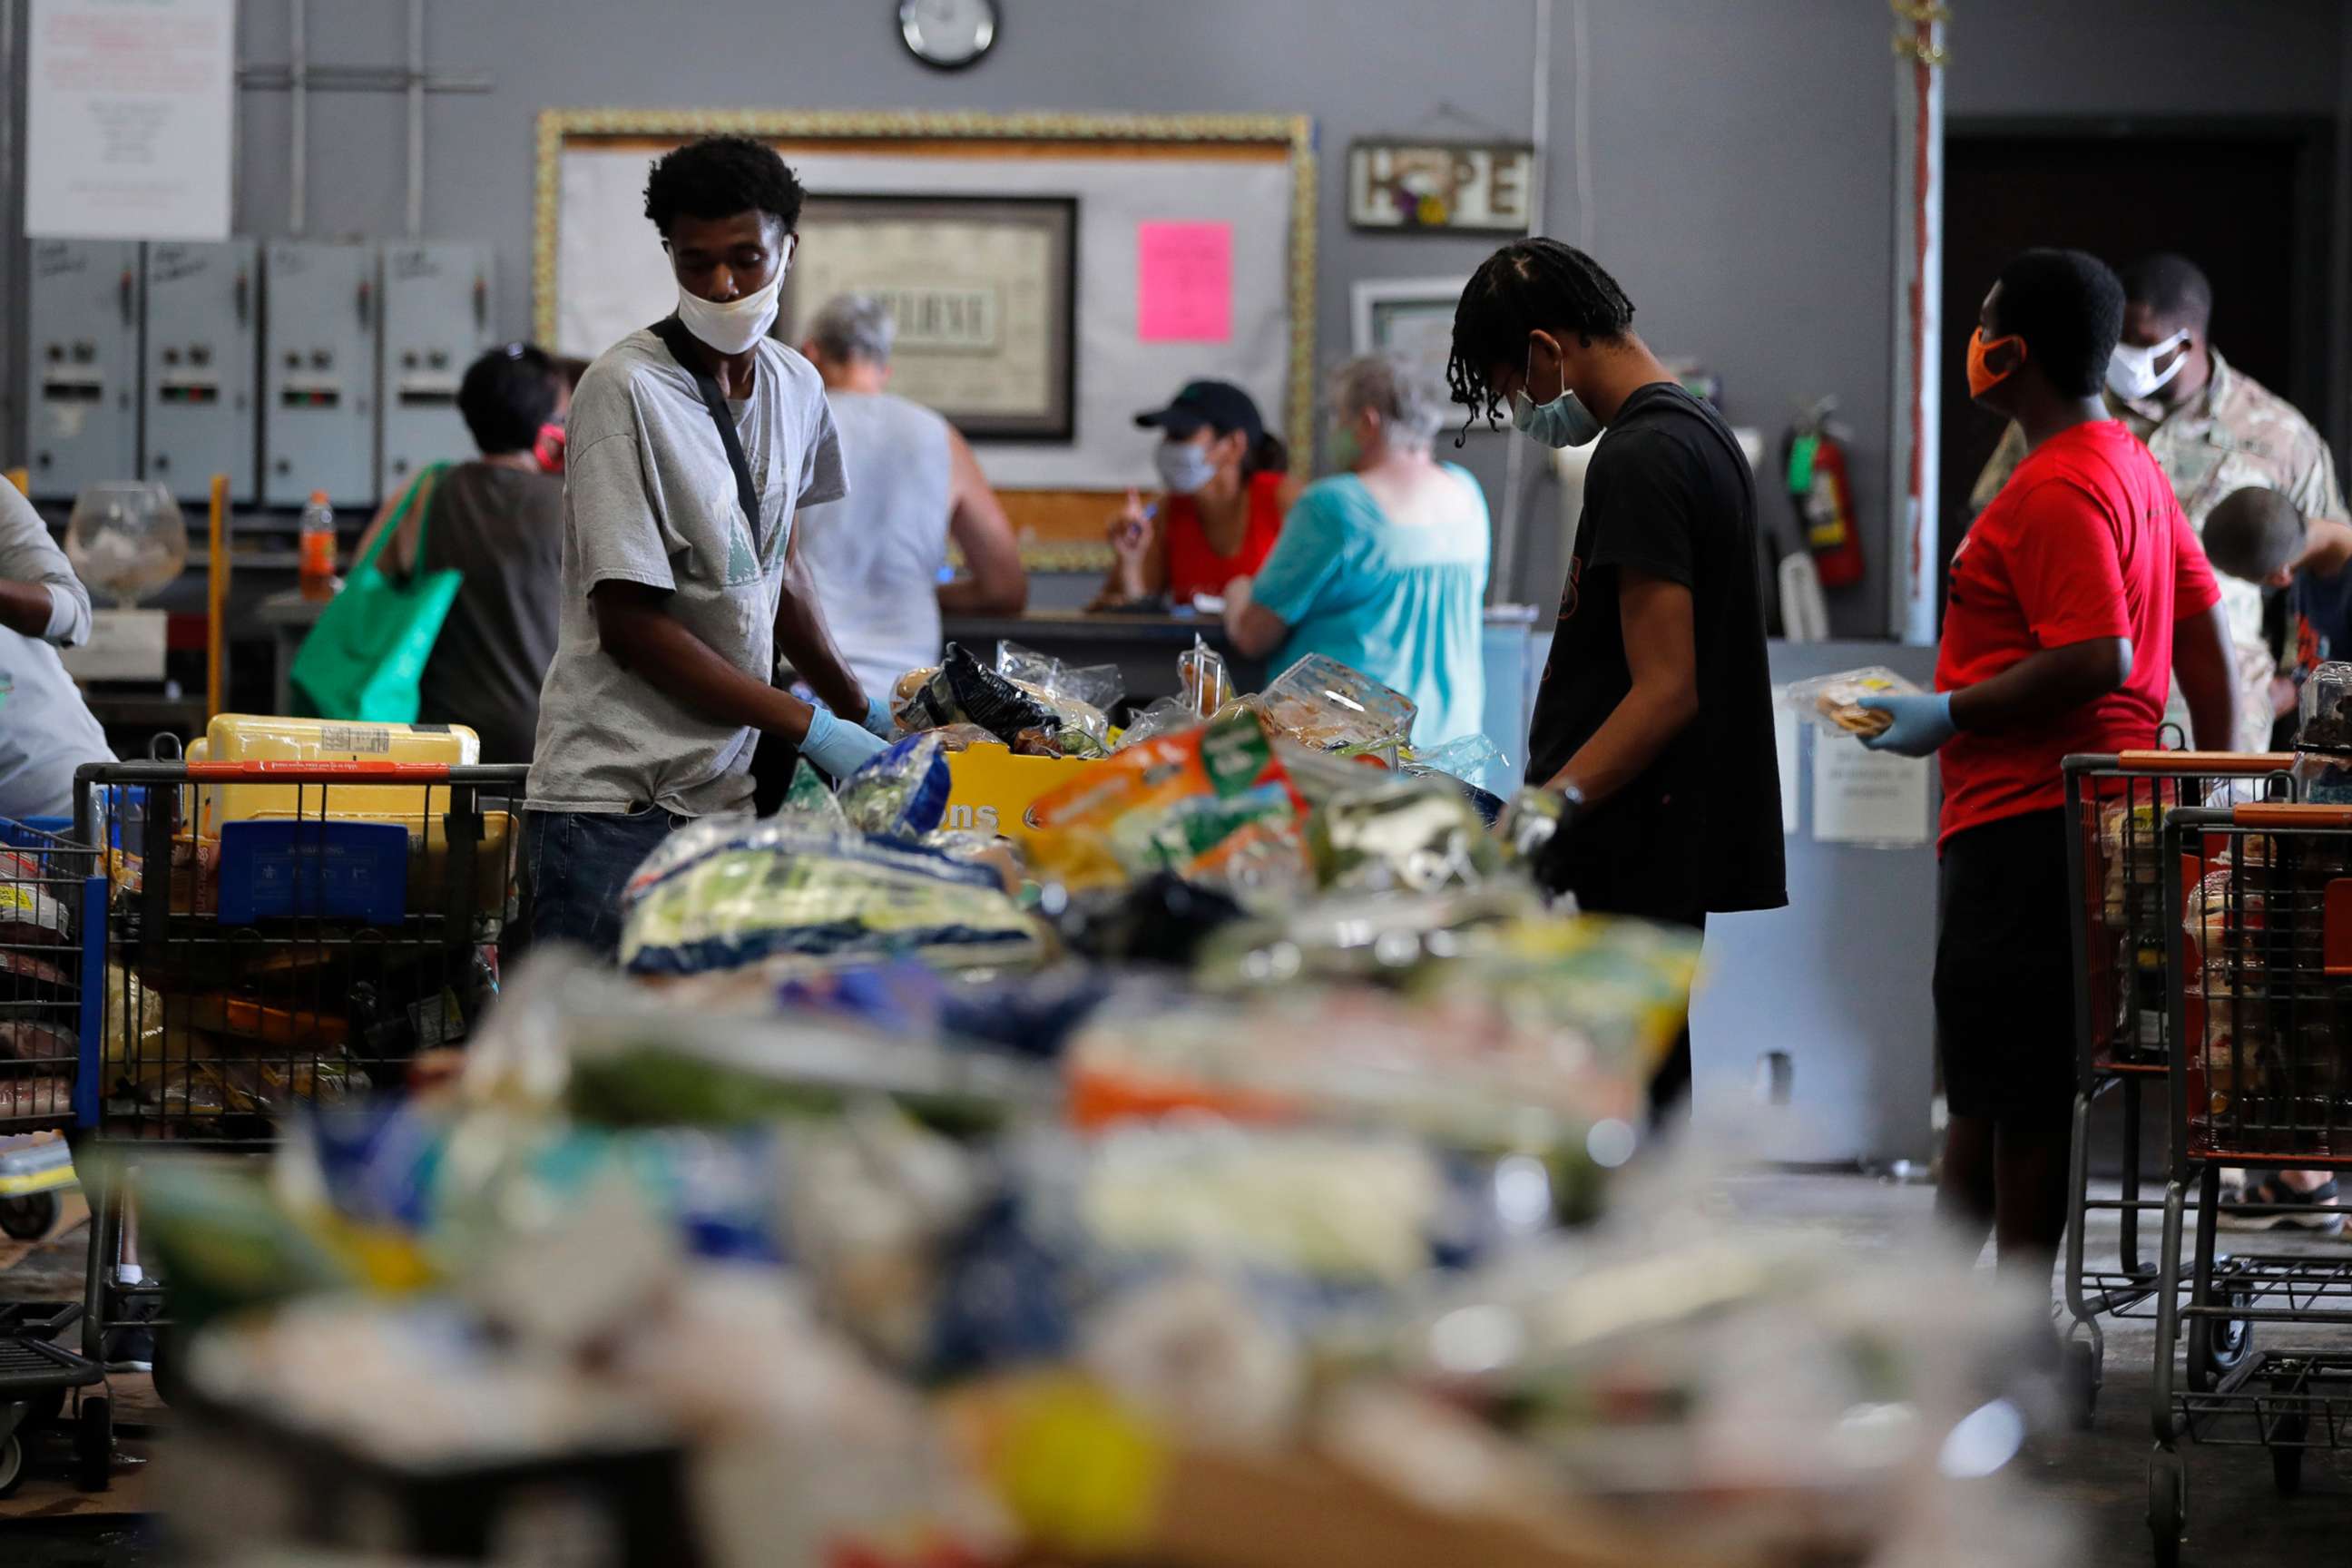 PHOTO: Voluteers distribute food to recipients at the Giving Hope Food Pantry during a food giveaway in New Orleans, July 21, 2020, to assist people who have lost income during the COVID-19 pandemic.